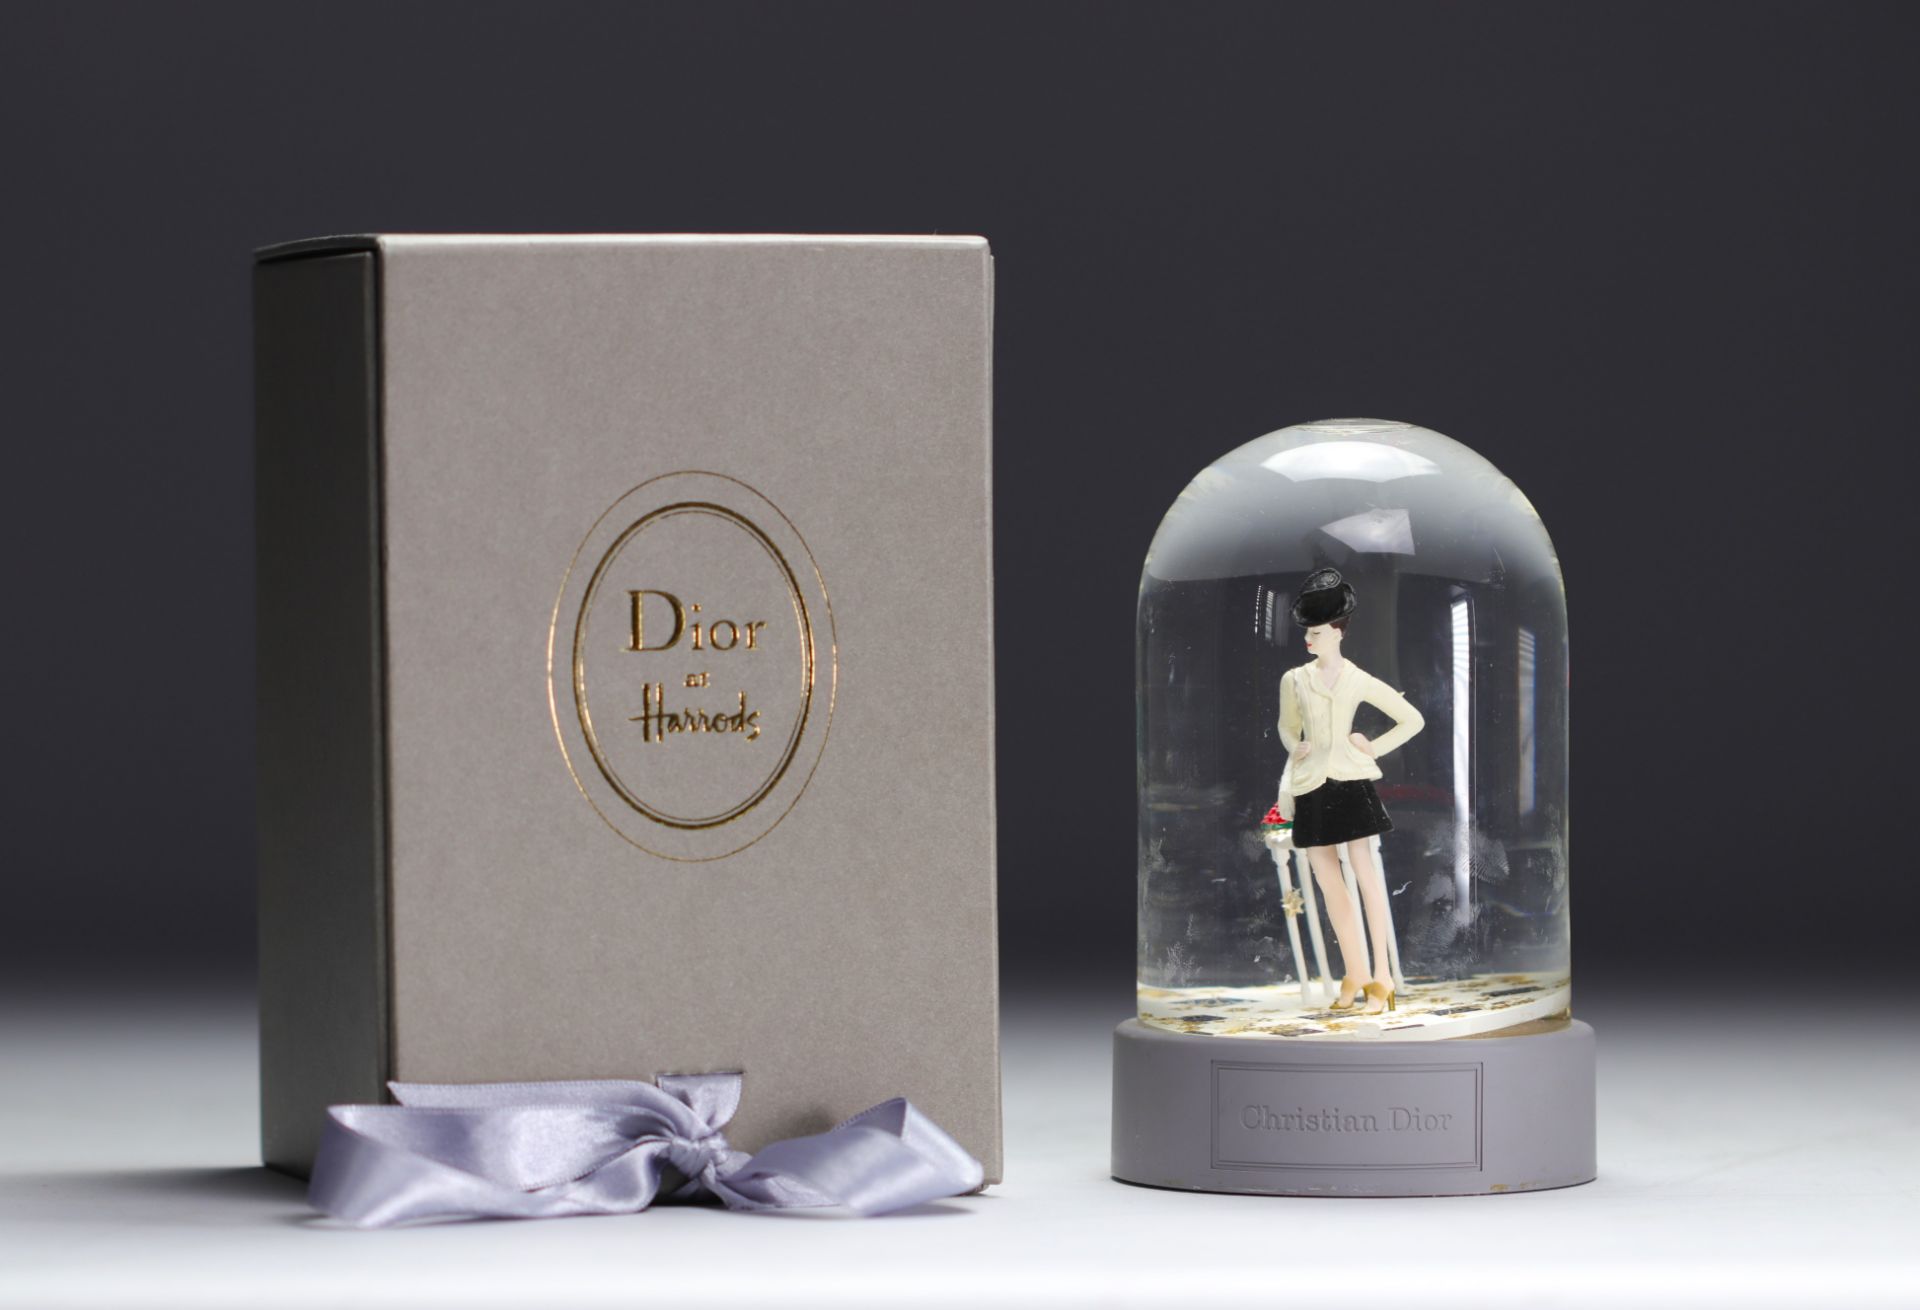 Christian Dior. 1997. Snow globe with golden star flakes featuring a customer from the Avenue Montai